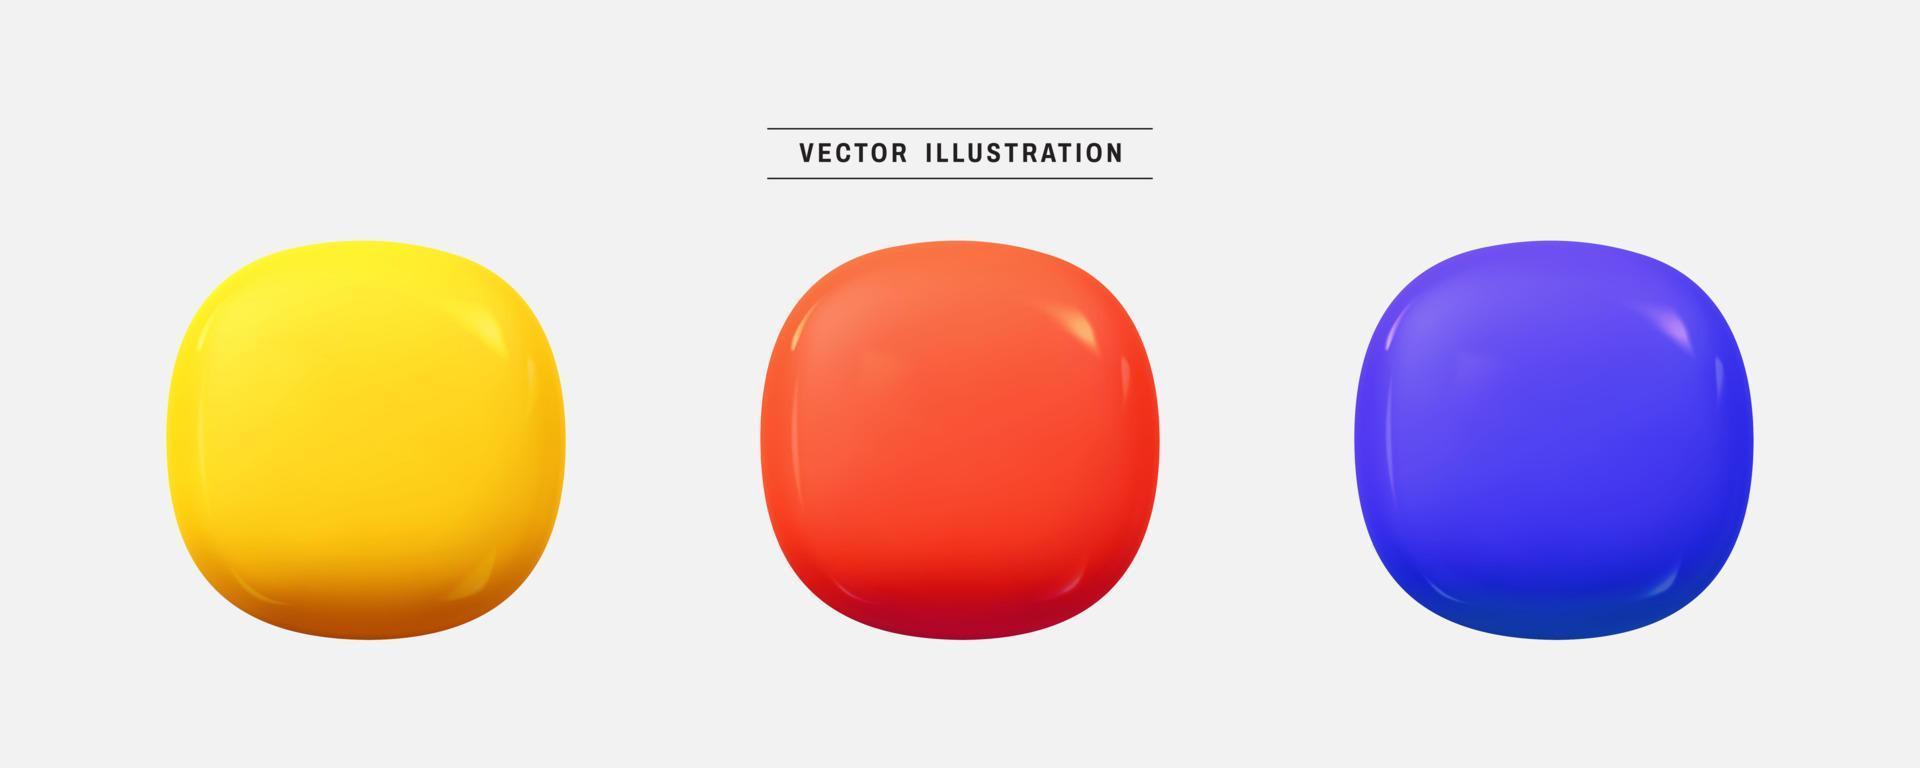 Rounded square button 3d icon render. realistic design elements collection. vector illustration in cartoon minimal style